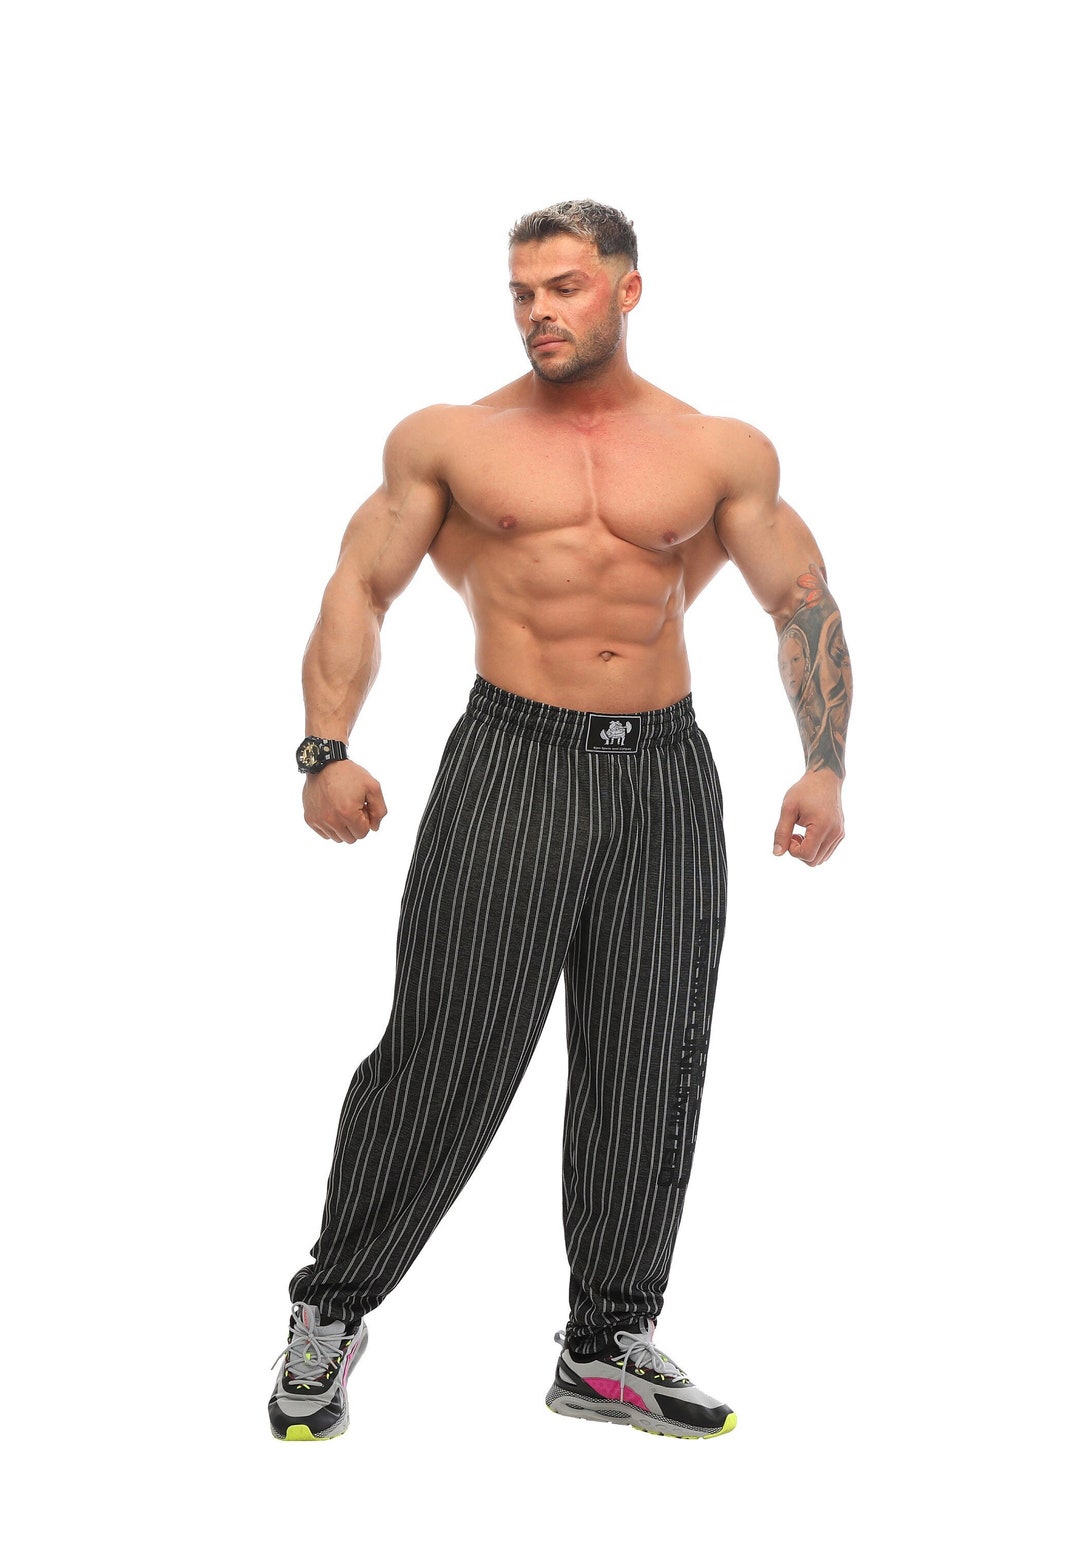 Men's Baggy Sweatpants With Pockets, Oldschool Loose Fit Gym Muscle Pants  Gift for Bodybuilders -  Canada